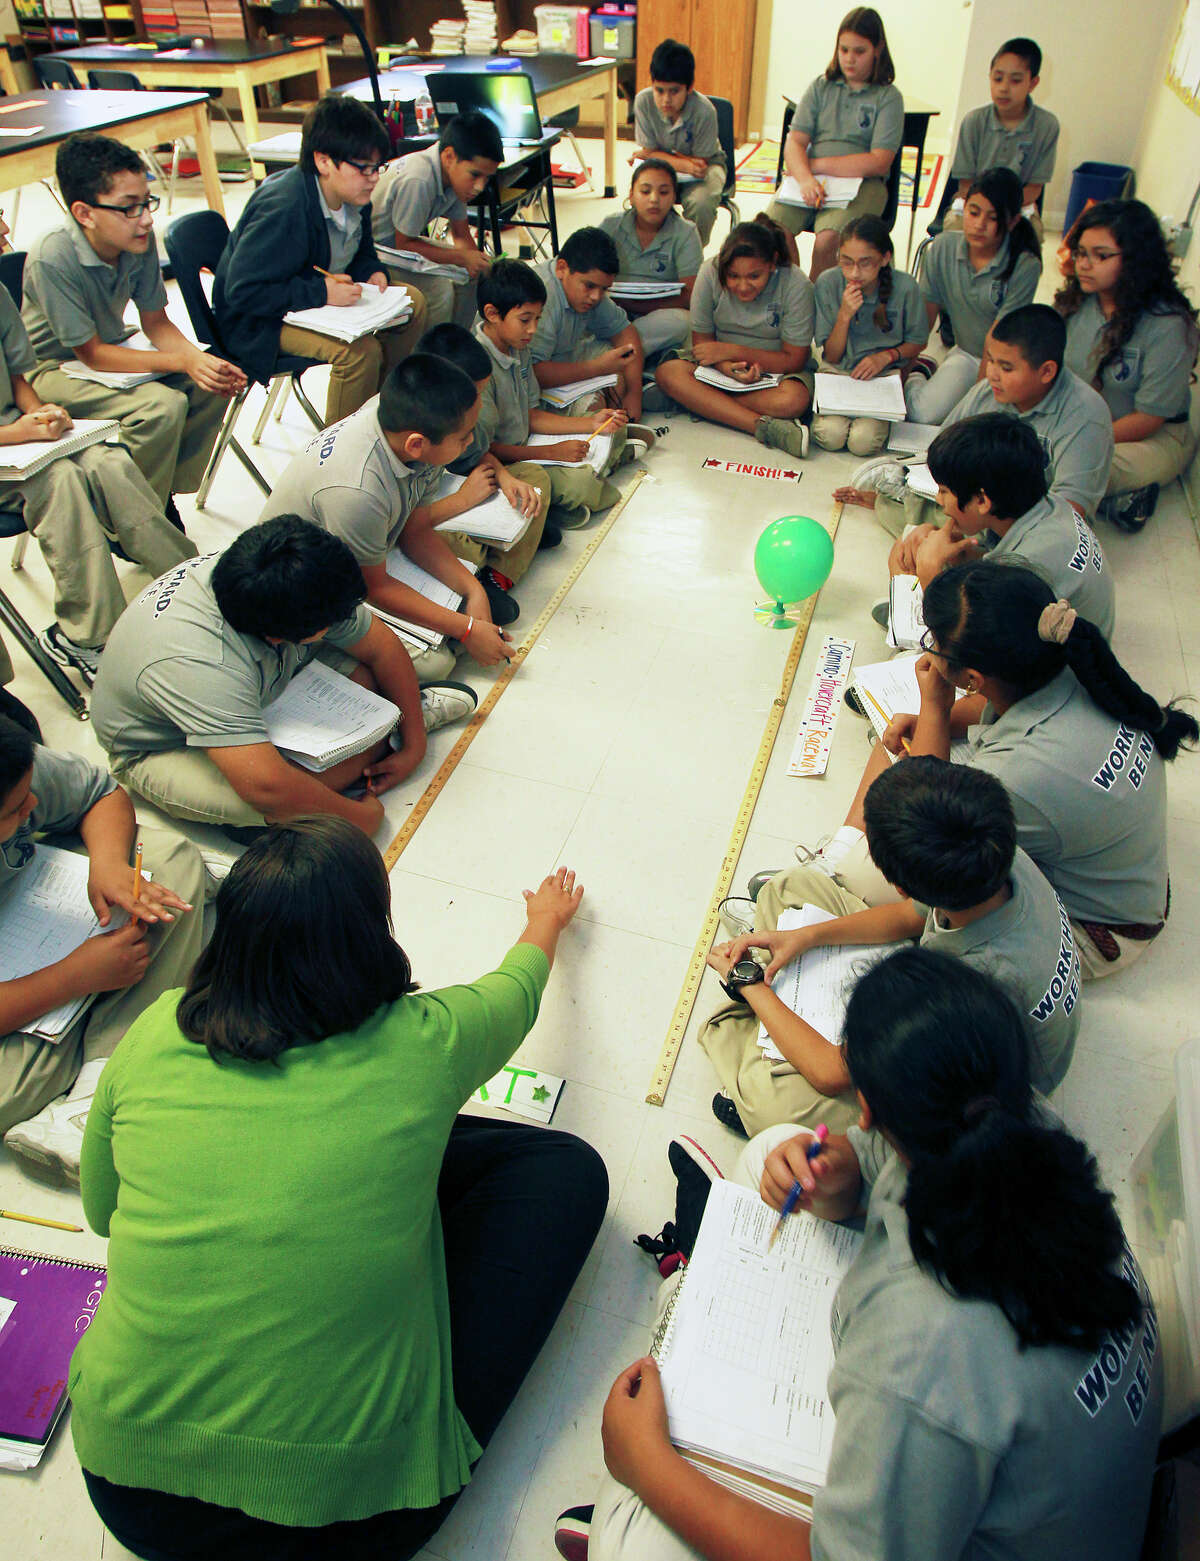 Students in Jennifer Ortegon's fifth grade science class time the release of air from a baloon experiment as KIPP Camino Academy conducts classes on October 17, 2012.